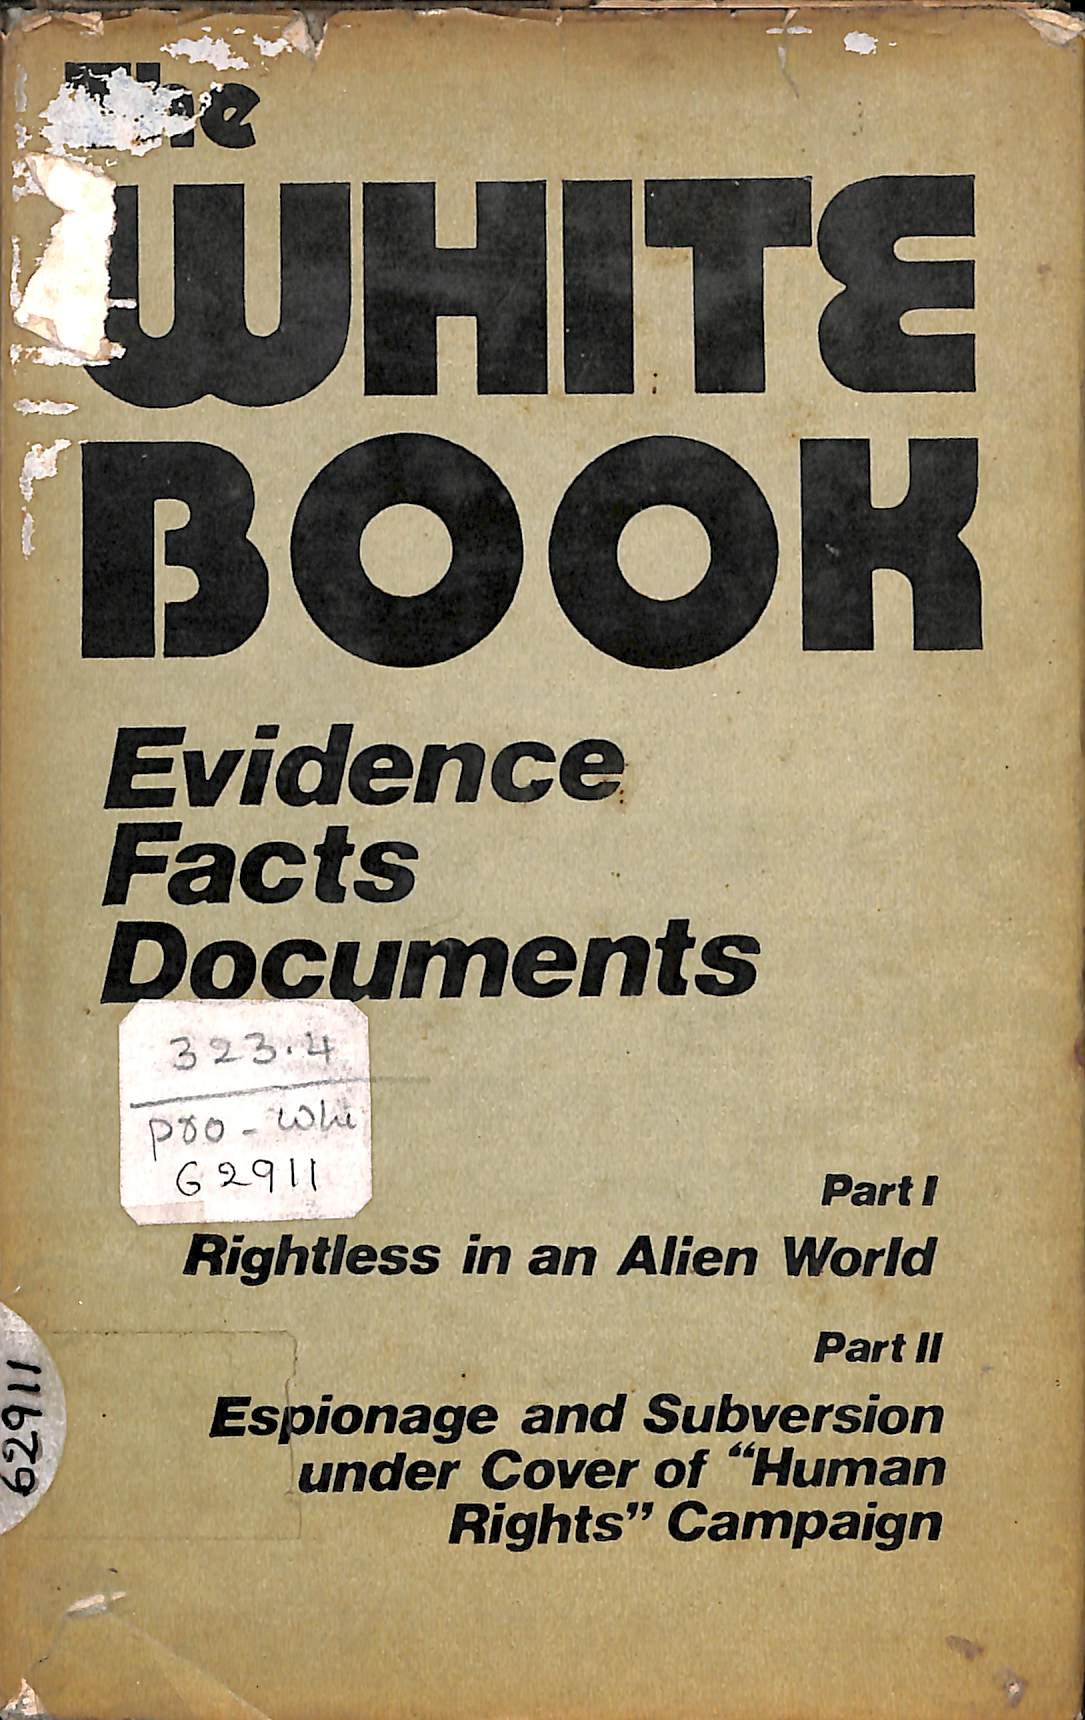 The White Book Evidence Facts Documents